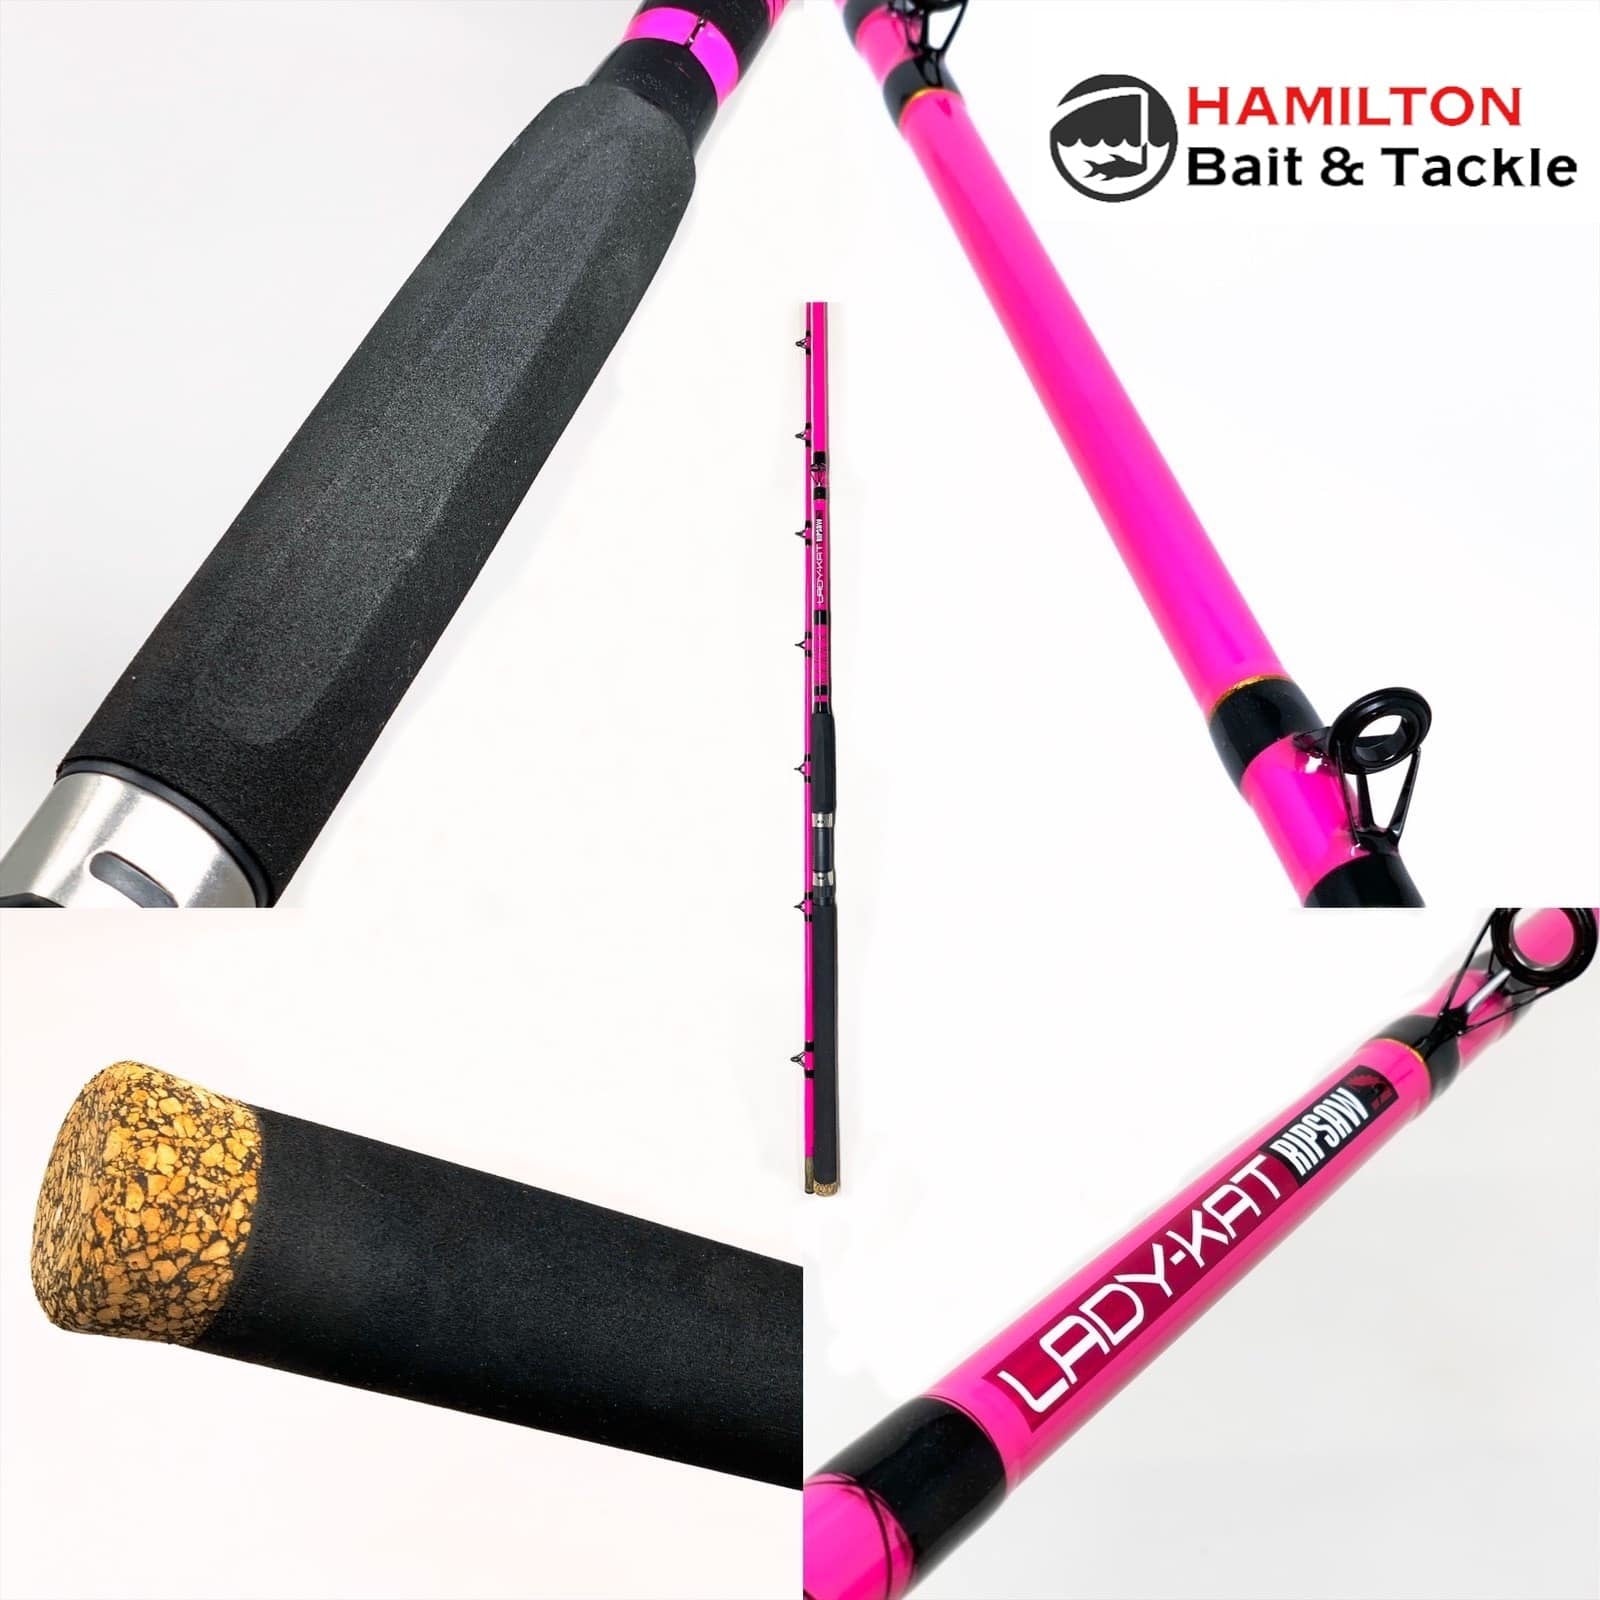 Ripsaw Lady Kat Spinning Rod - 9' - Hamilton Bait and Tackle